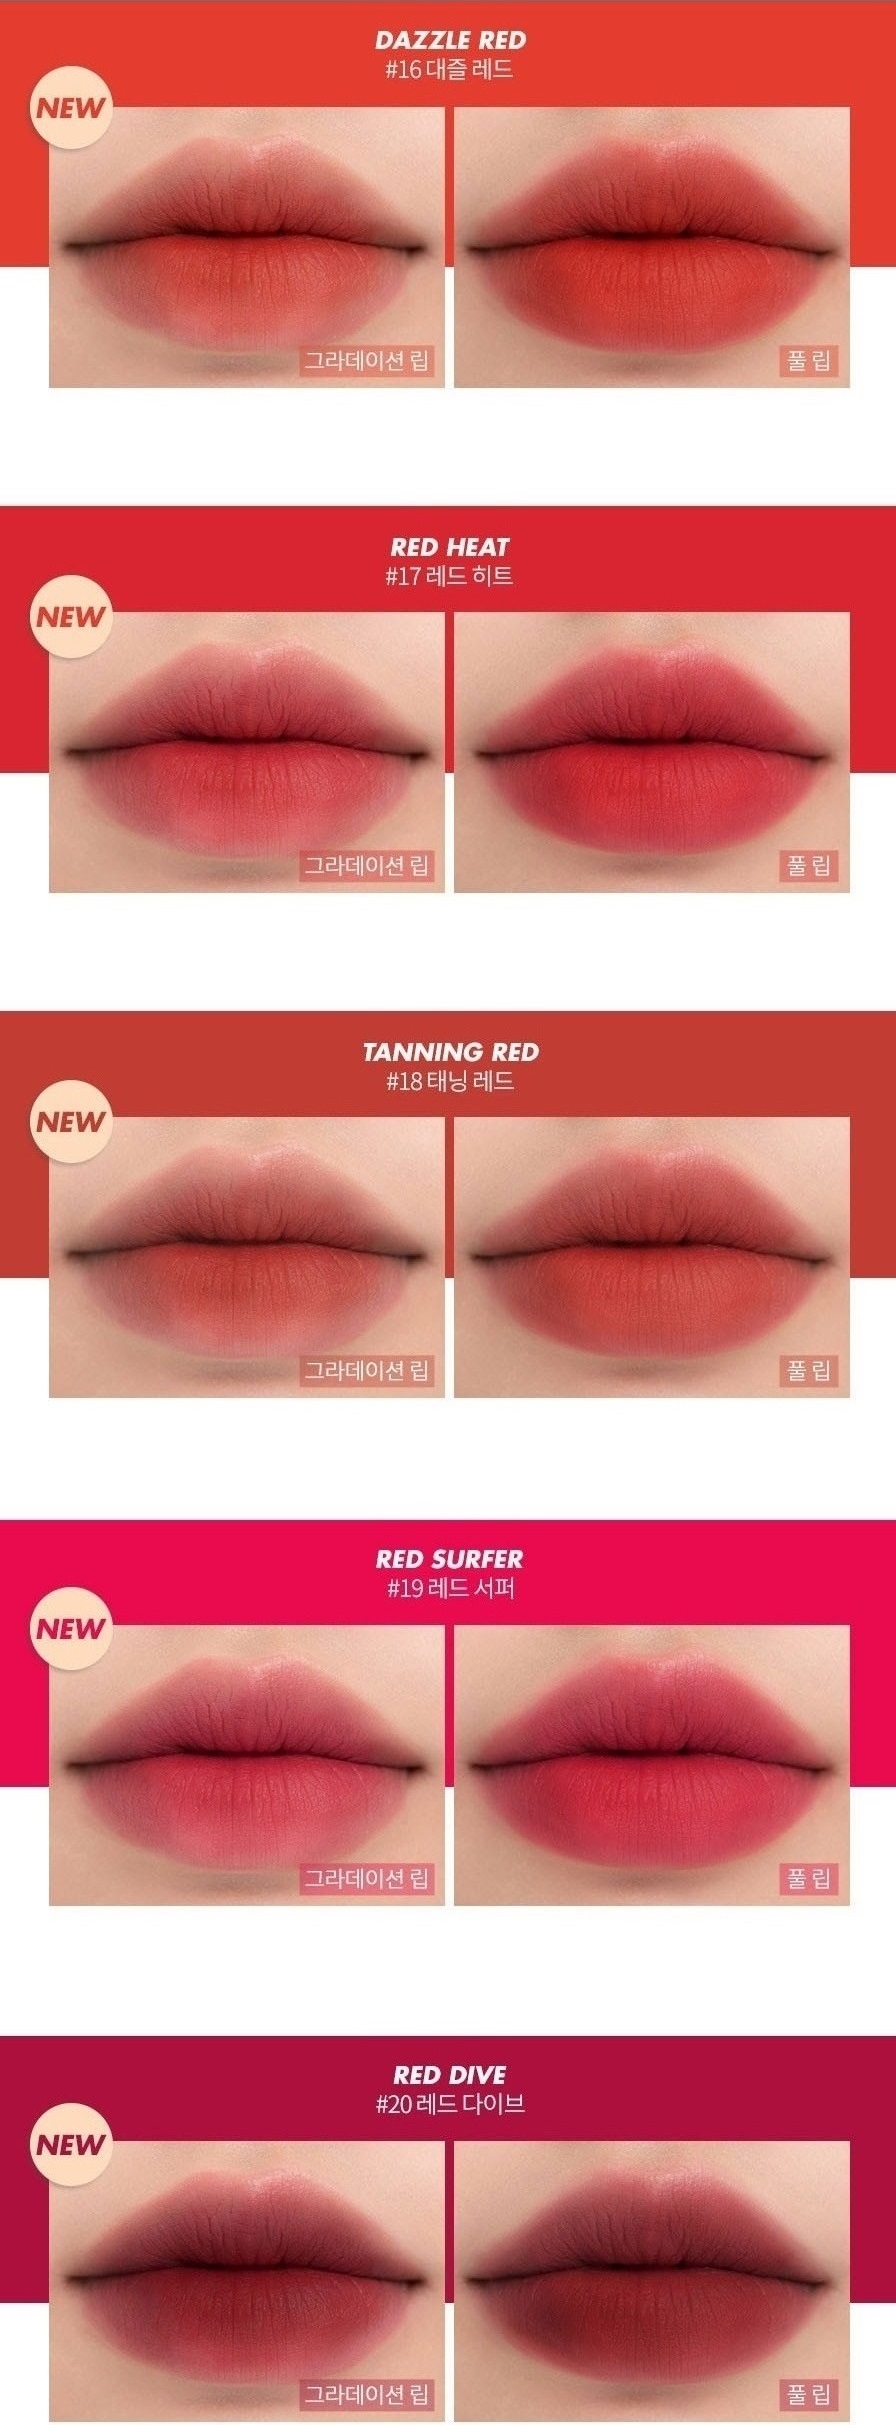 ROMAND Zero Matte Lipstick Dazzle Red Red Heat Tanning Red Red Surfer Red Dive 1